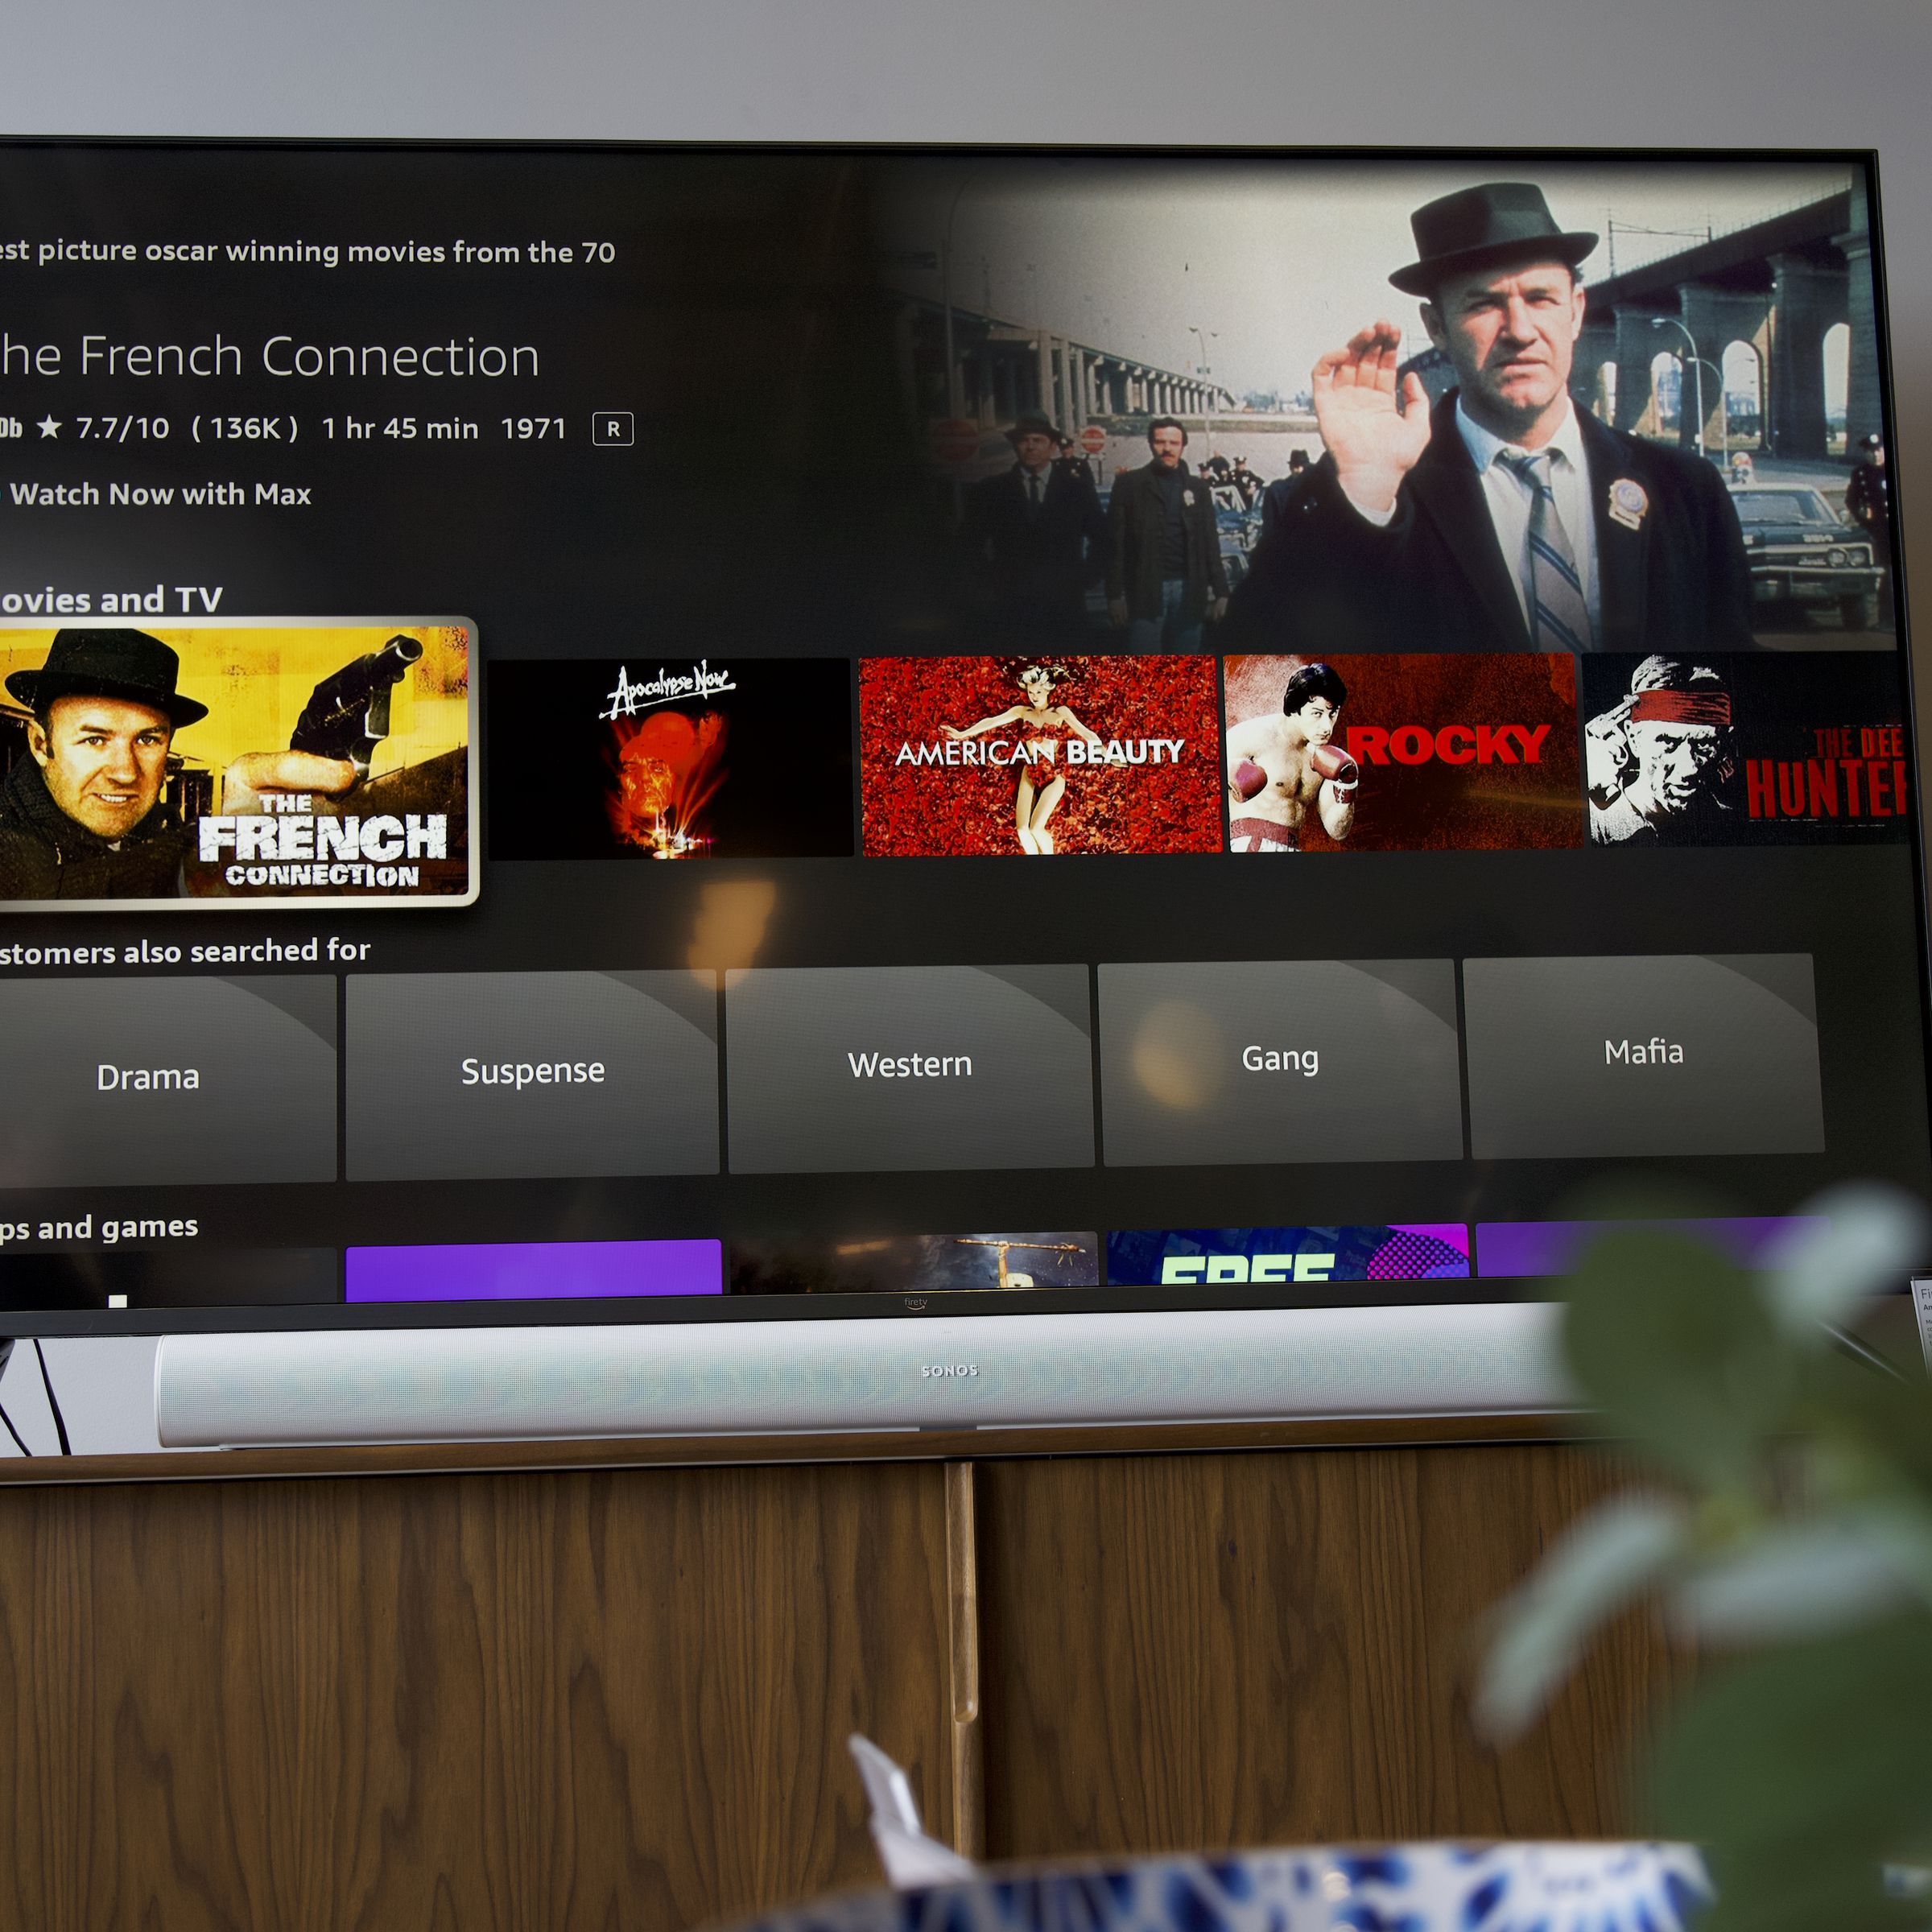 The new AI-powered search from Amazon for Fire TVs lets Alexa help you more easily find what you want to watch.